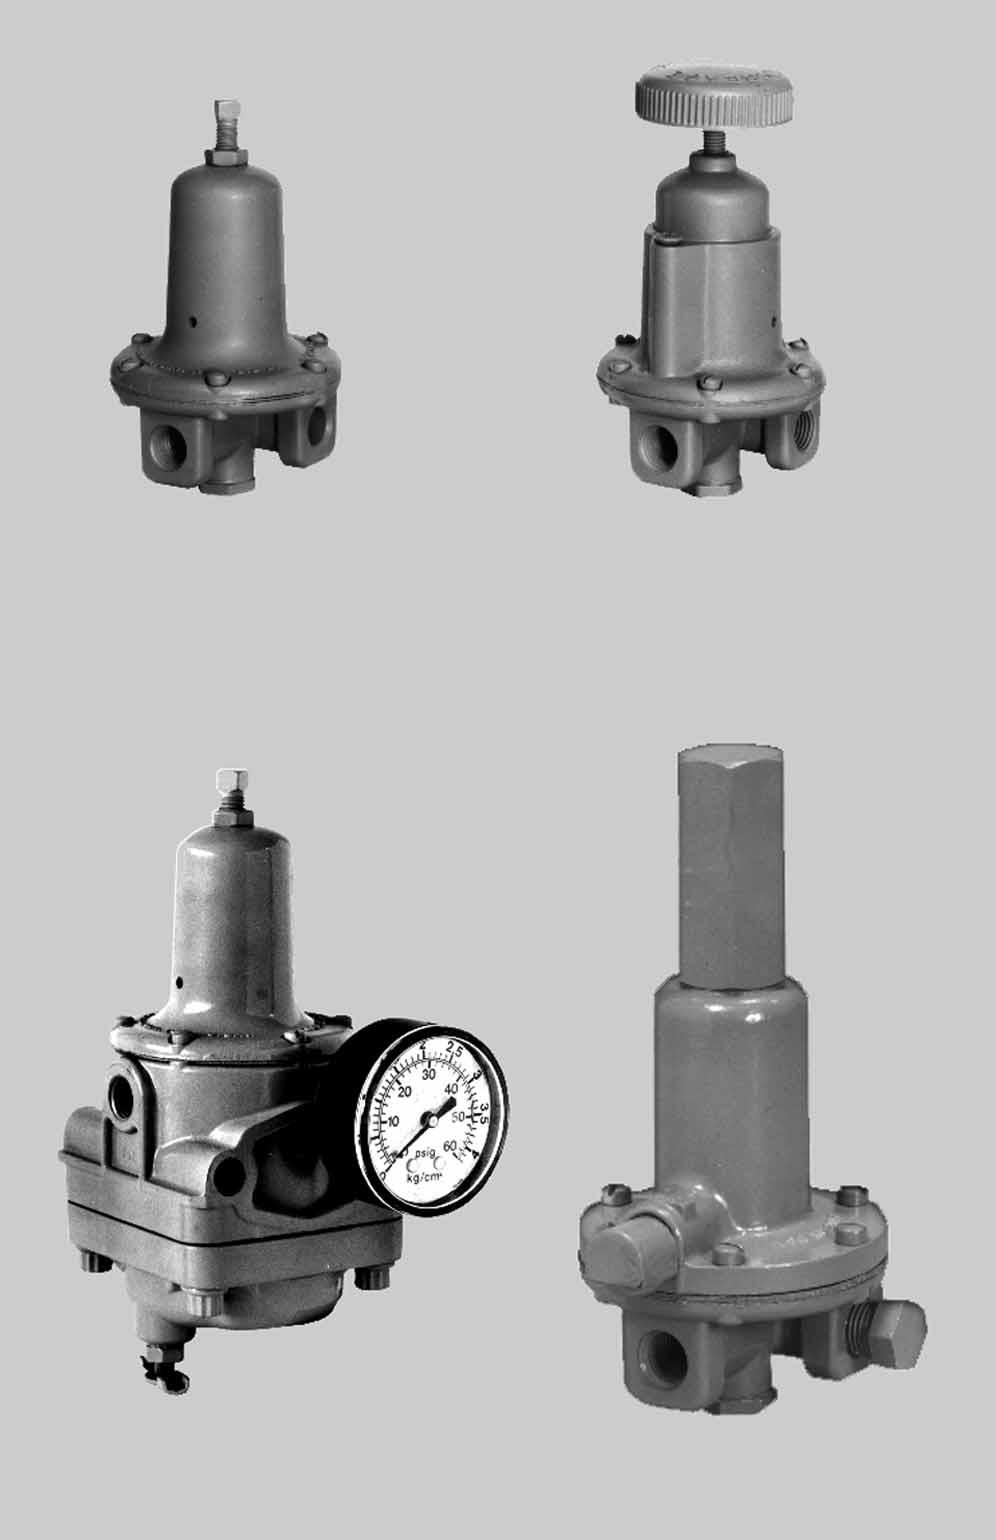 67 Series Pressure Regulators Fisher Controls November 1986 Bulletin The 67 Series small-volume regulators (figure 1) are typically used to provide constantly controlled reduced pressures to